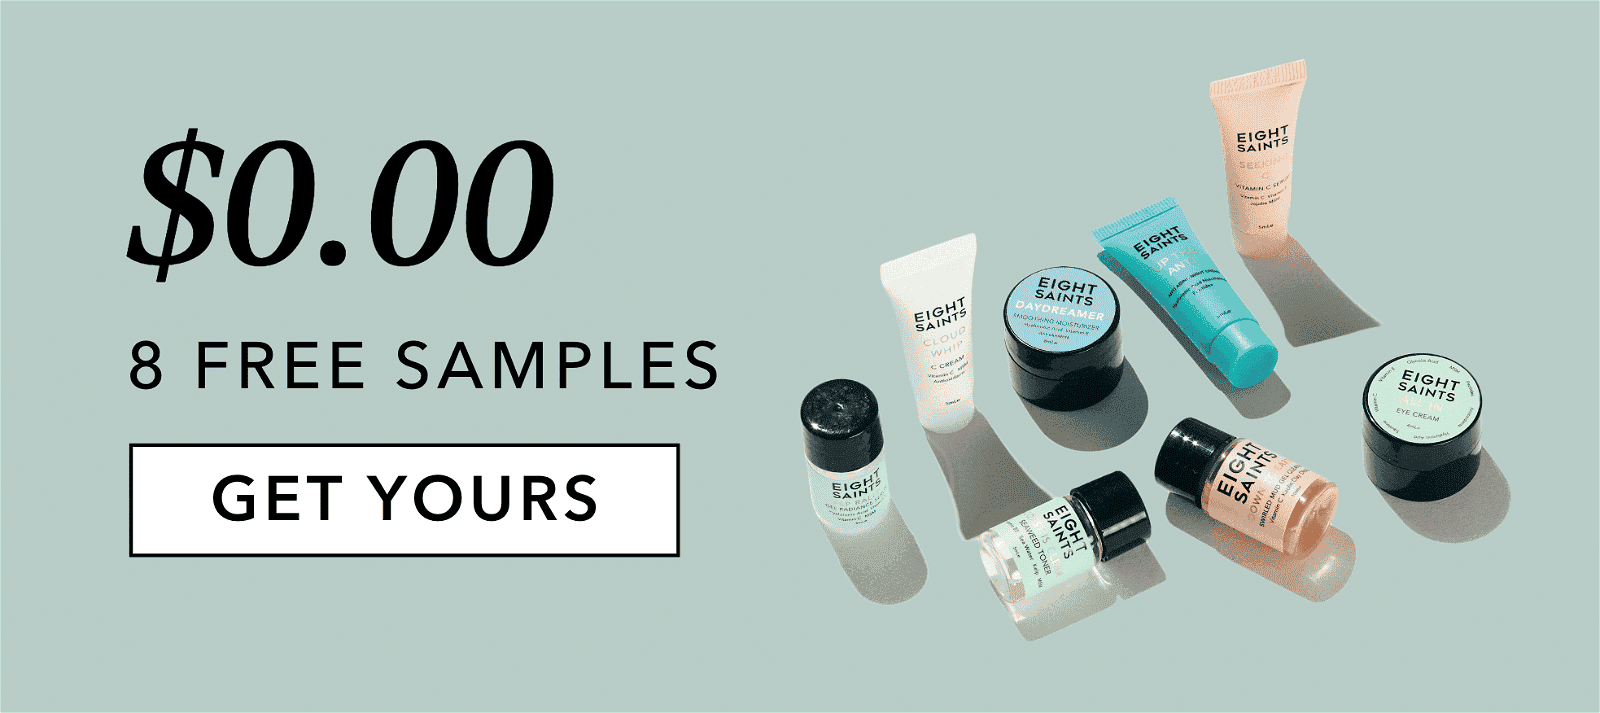 Get 8 samples for free